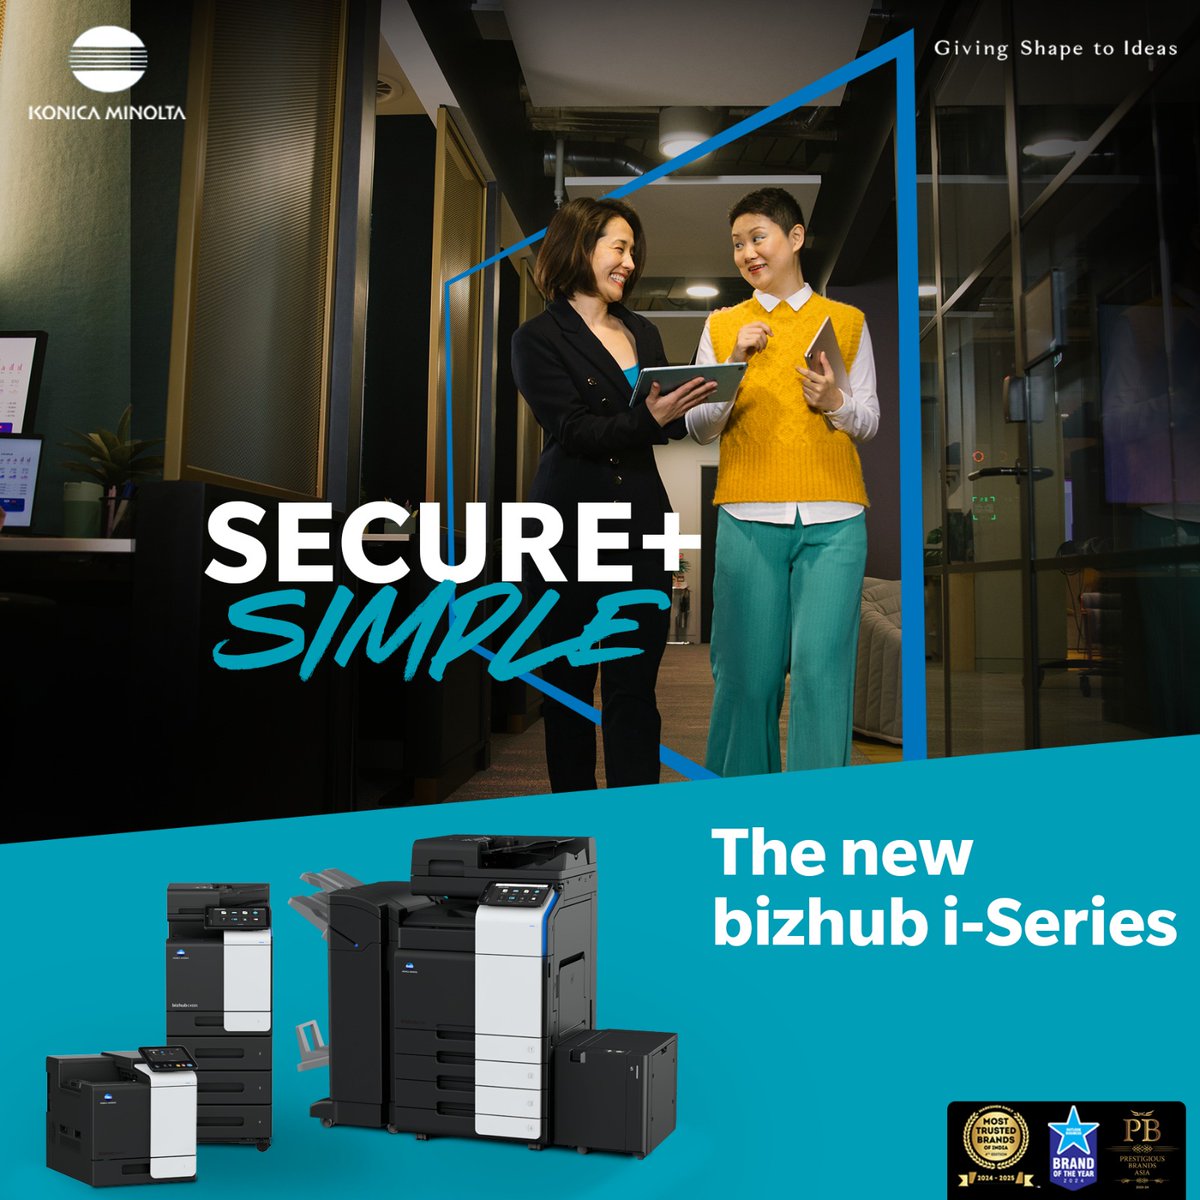 Introducing the newest members of the #bizhub i series, engineered to streamline your printing journey while prioritising enhanced security. Simplify your workflow & unlock the future of office printing with our Secure + Simple solutions!

#KonicaMinolta #RethinkPrint #NewLaunch